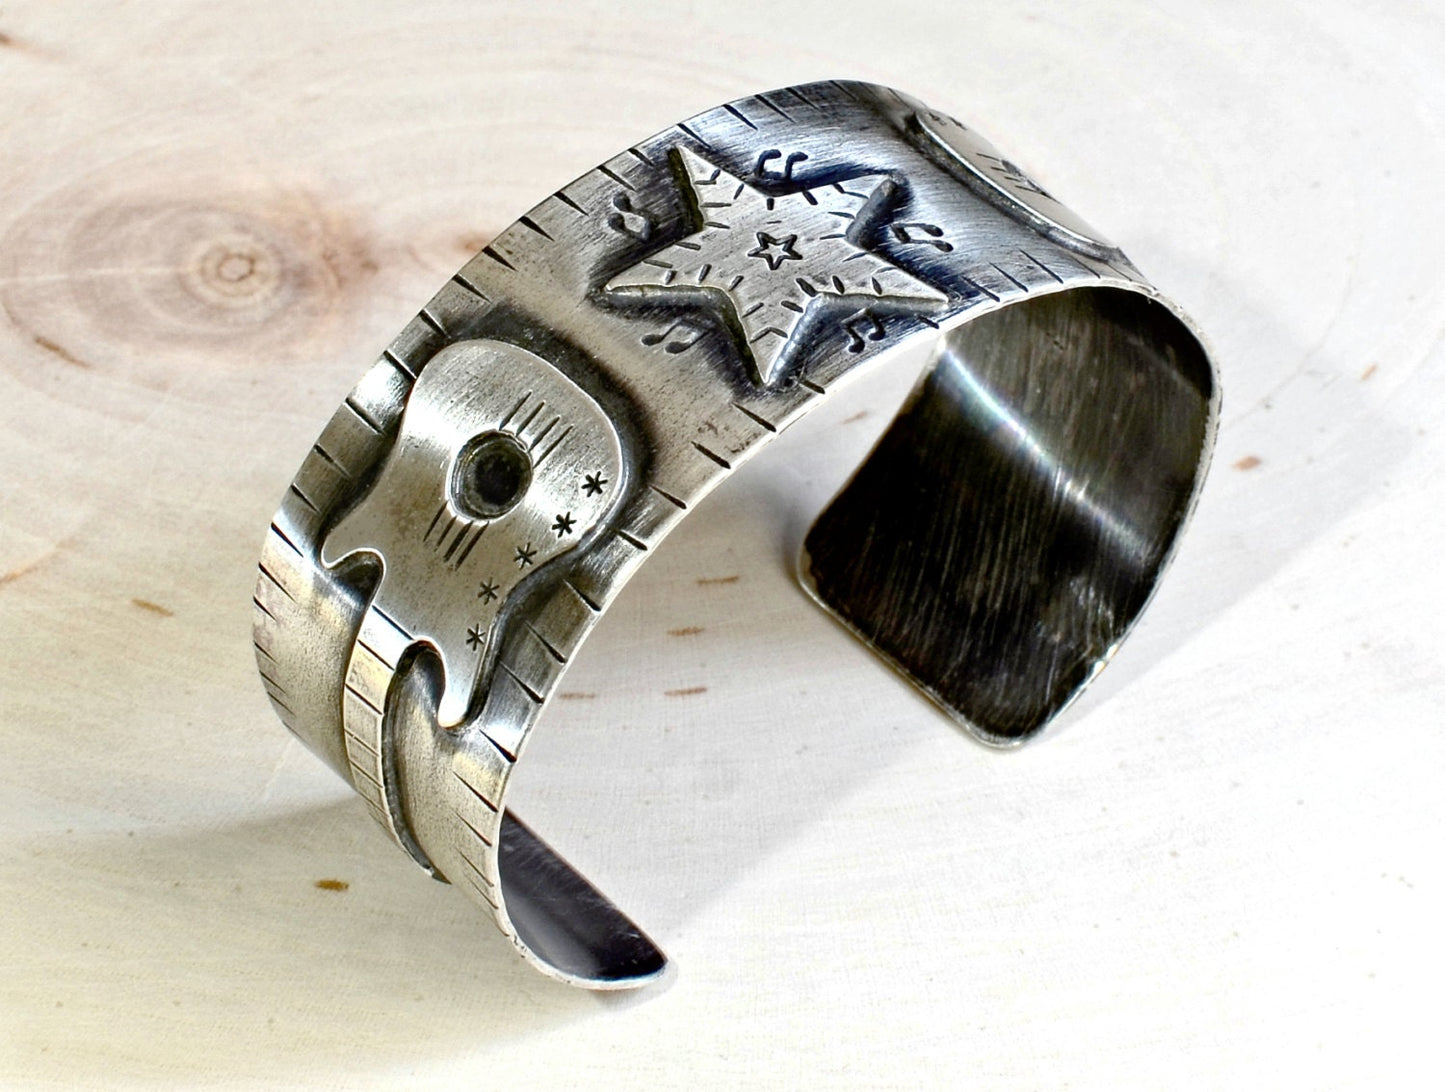 Guitars and stars sterling silver cuff bracelet